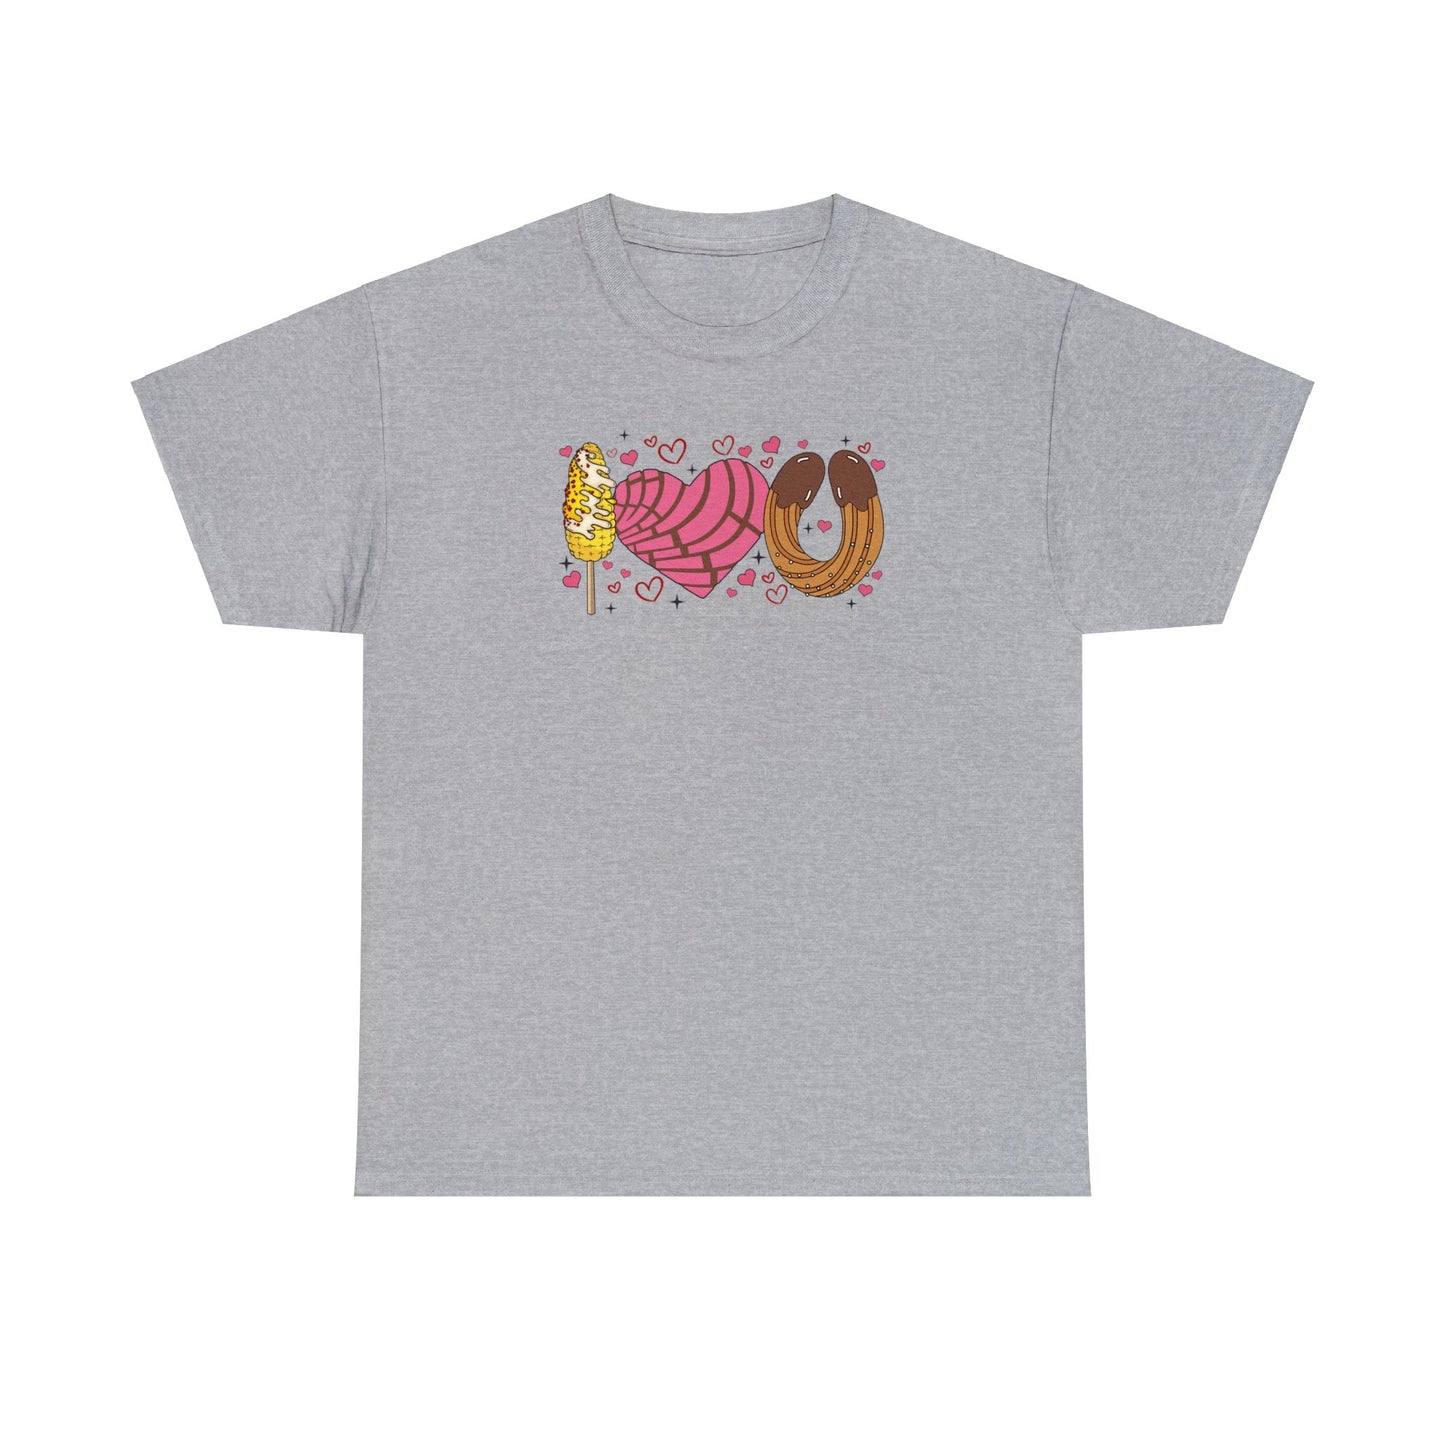 I love you shirt with elote, concha y churro. Mexican Unisex Heavy Cotton Tee. Mexican Valentines Day. Pan dulce shirt.